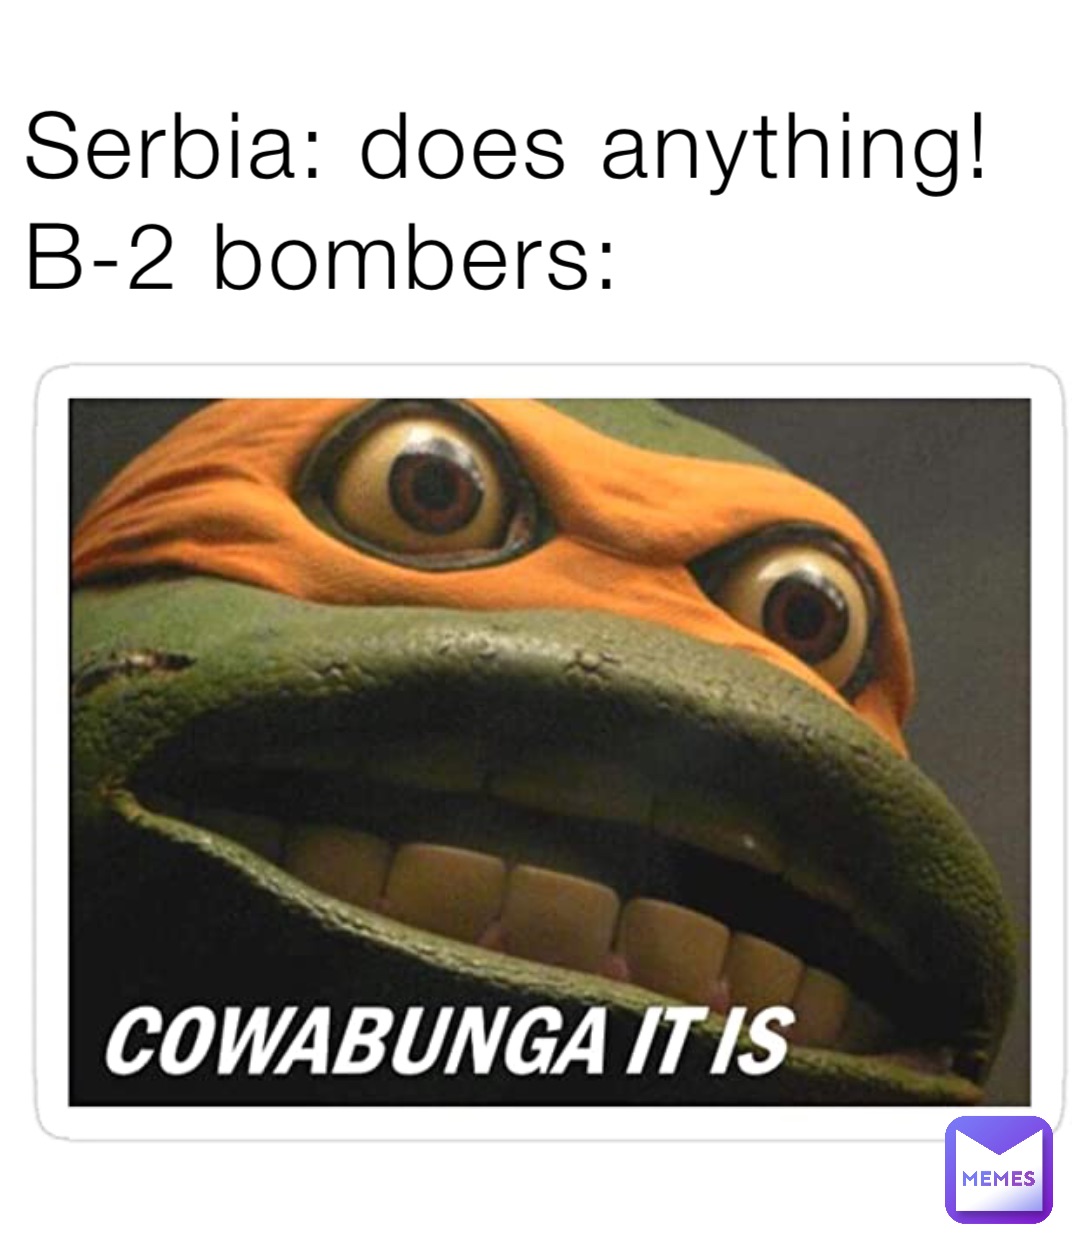 Serbia: does anything!
B-2 bombers: